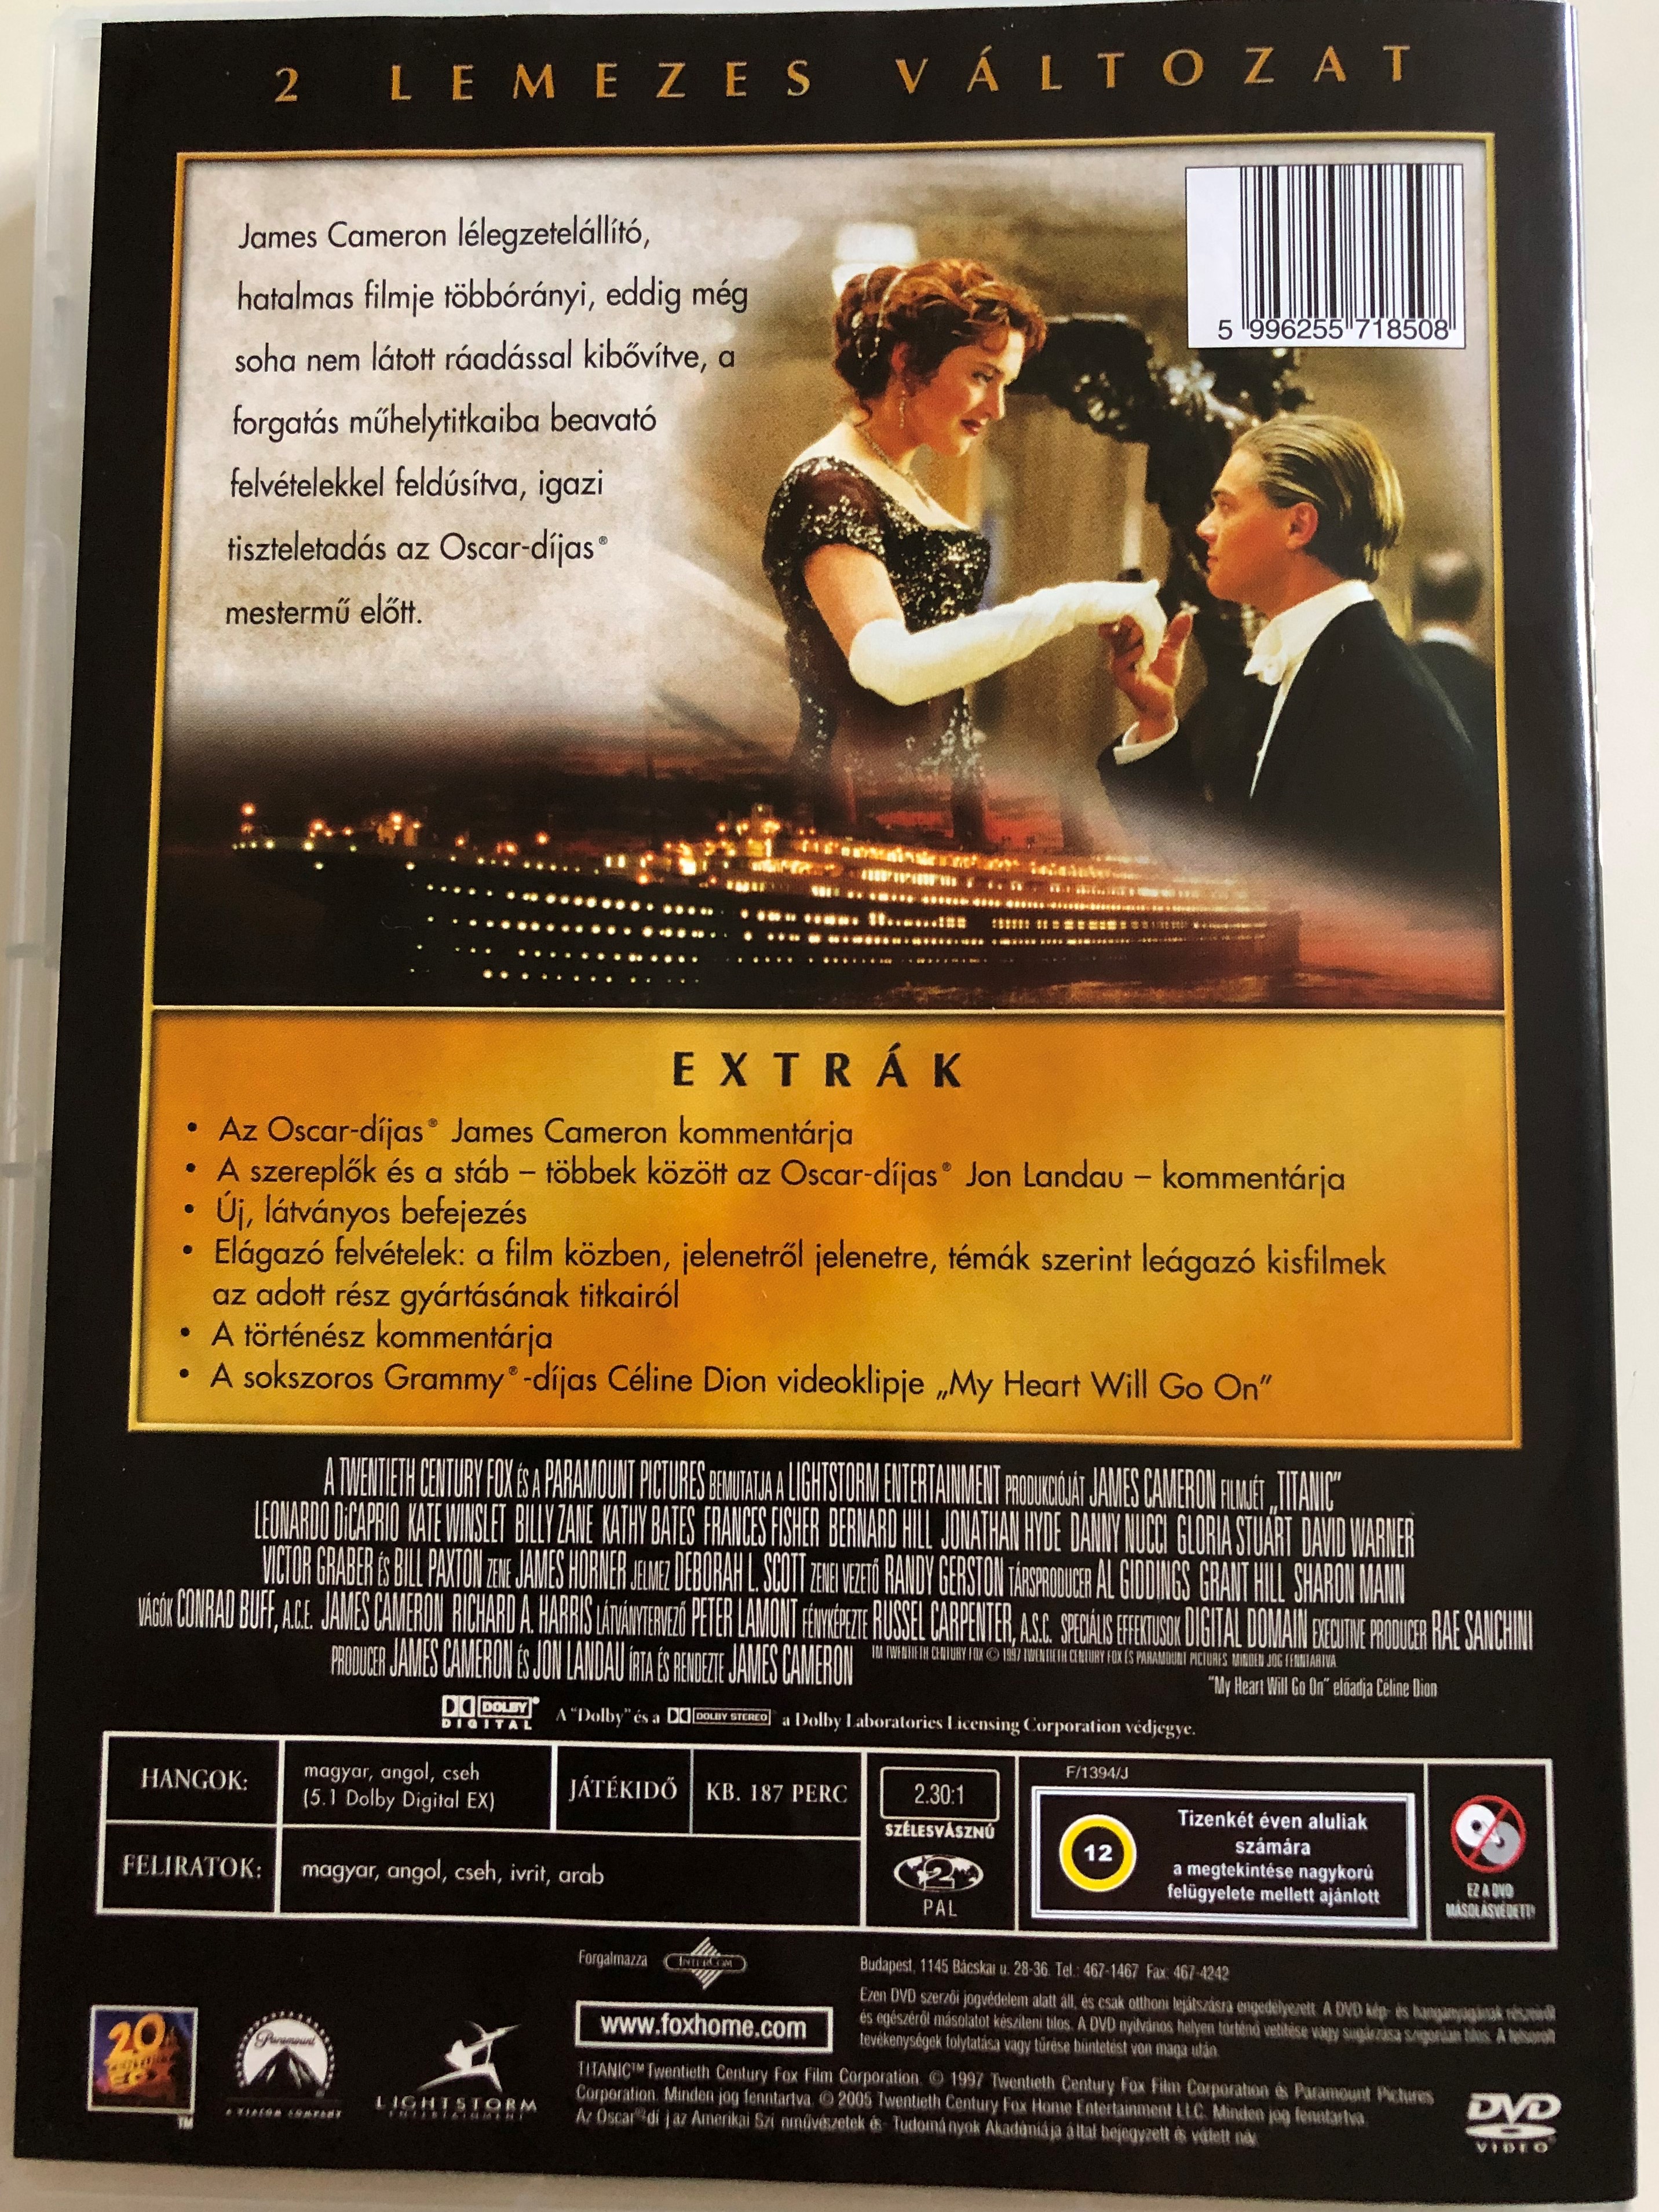 Titanic 1997 DVD Deluxe Collectors Edition / 2 DVD / Directed by James  Cameron / Starring: Leonardo DiCaprio, Kate Winslet, Billy Zane, Kathy  Bates, Frances Fisher, Bernard Hill - Bible in My Language